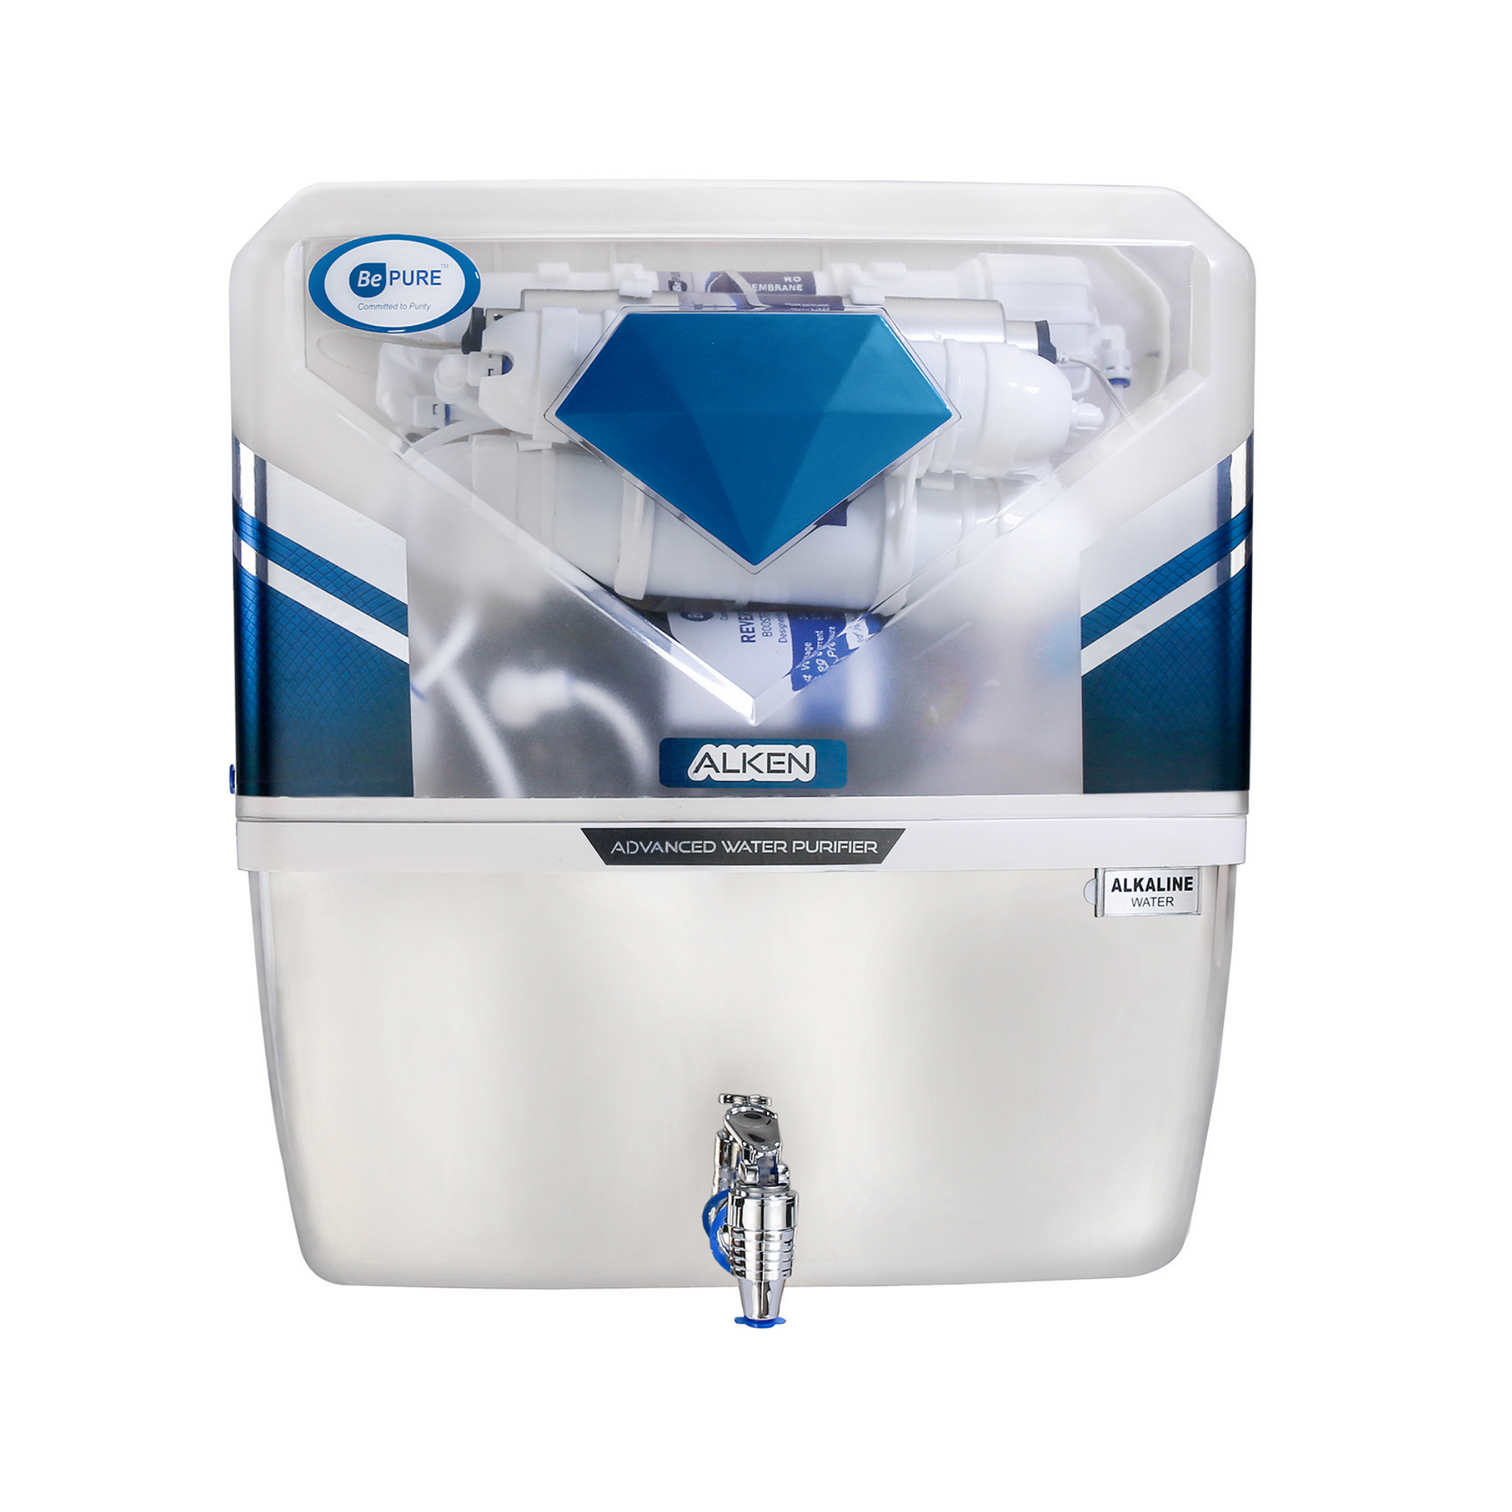 Bepure water purifier with stainless steel